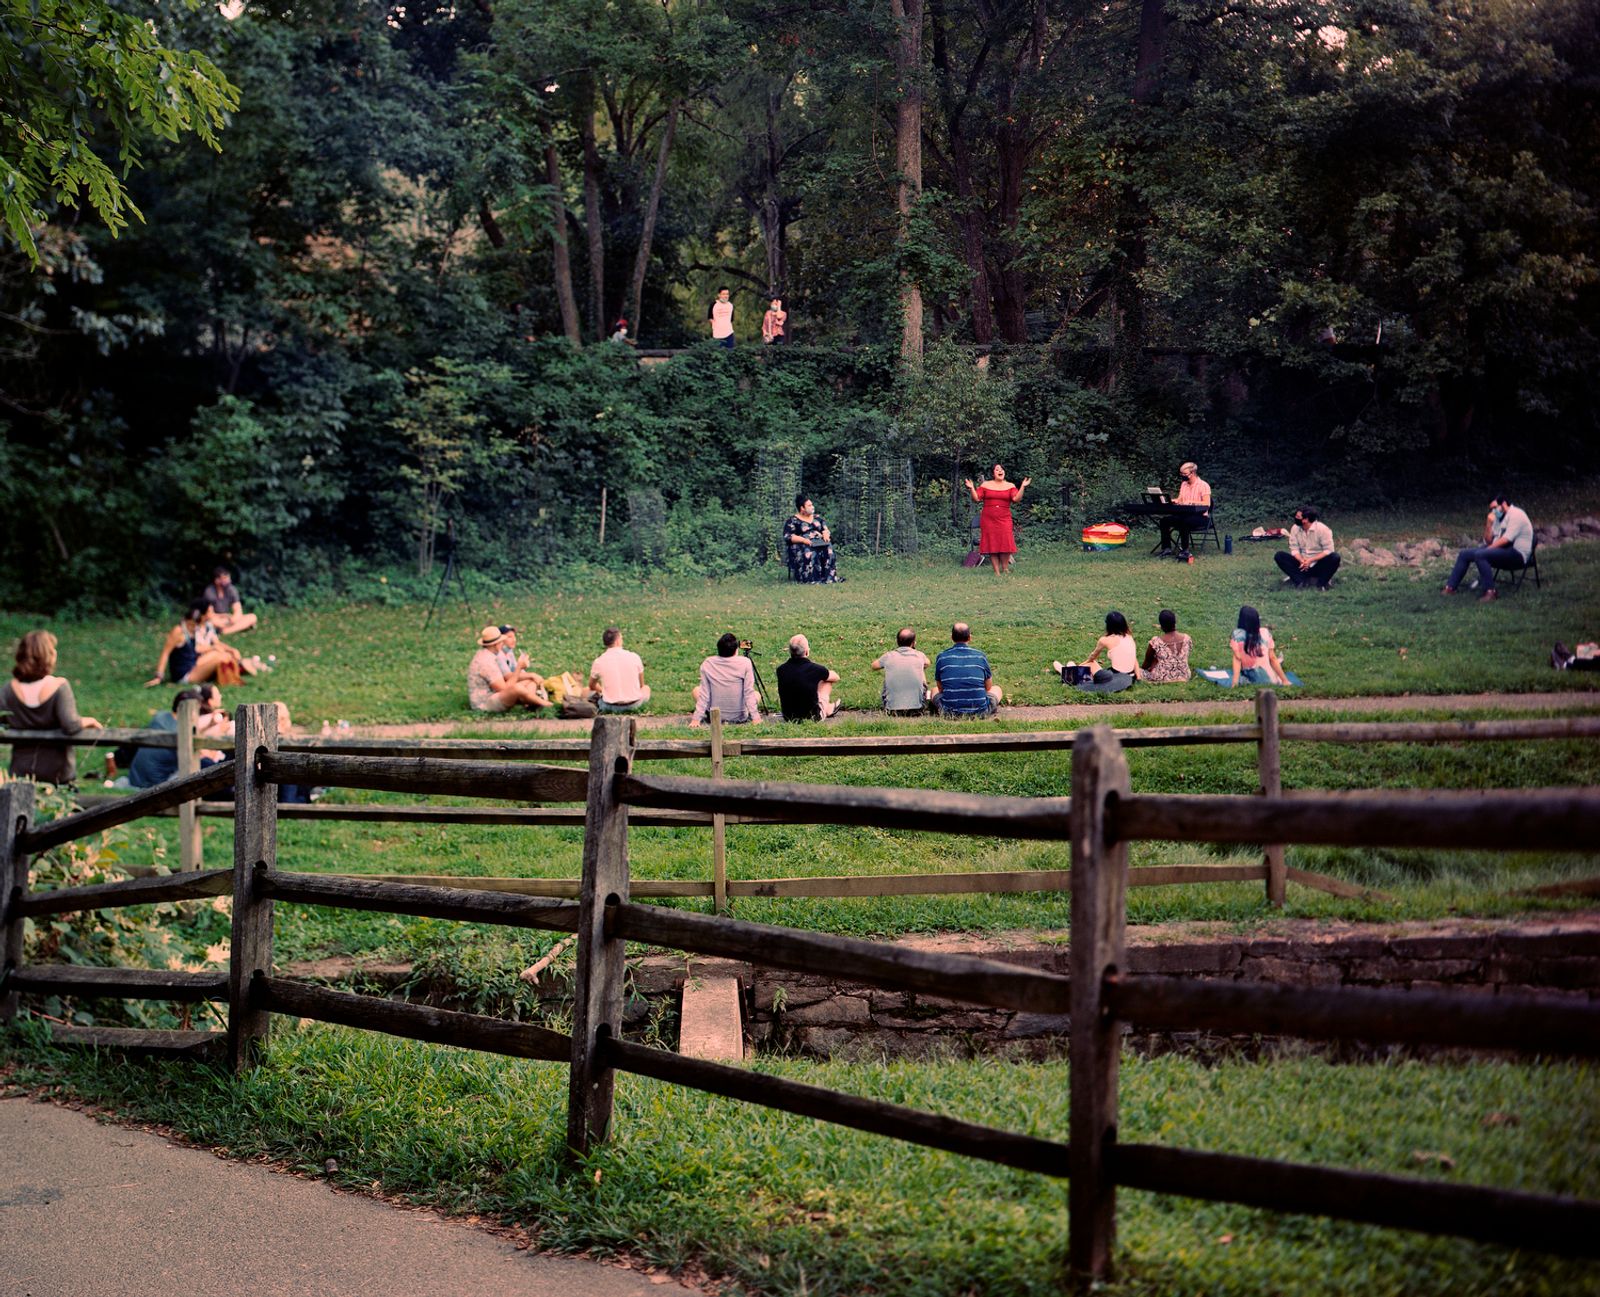 © T.J. Kirkpatrick - Image from the The Park photography project